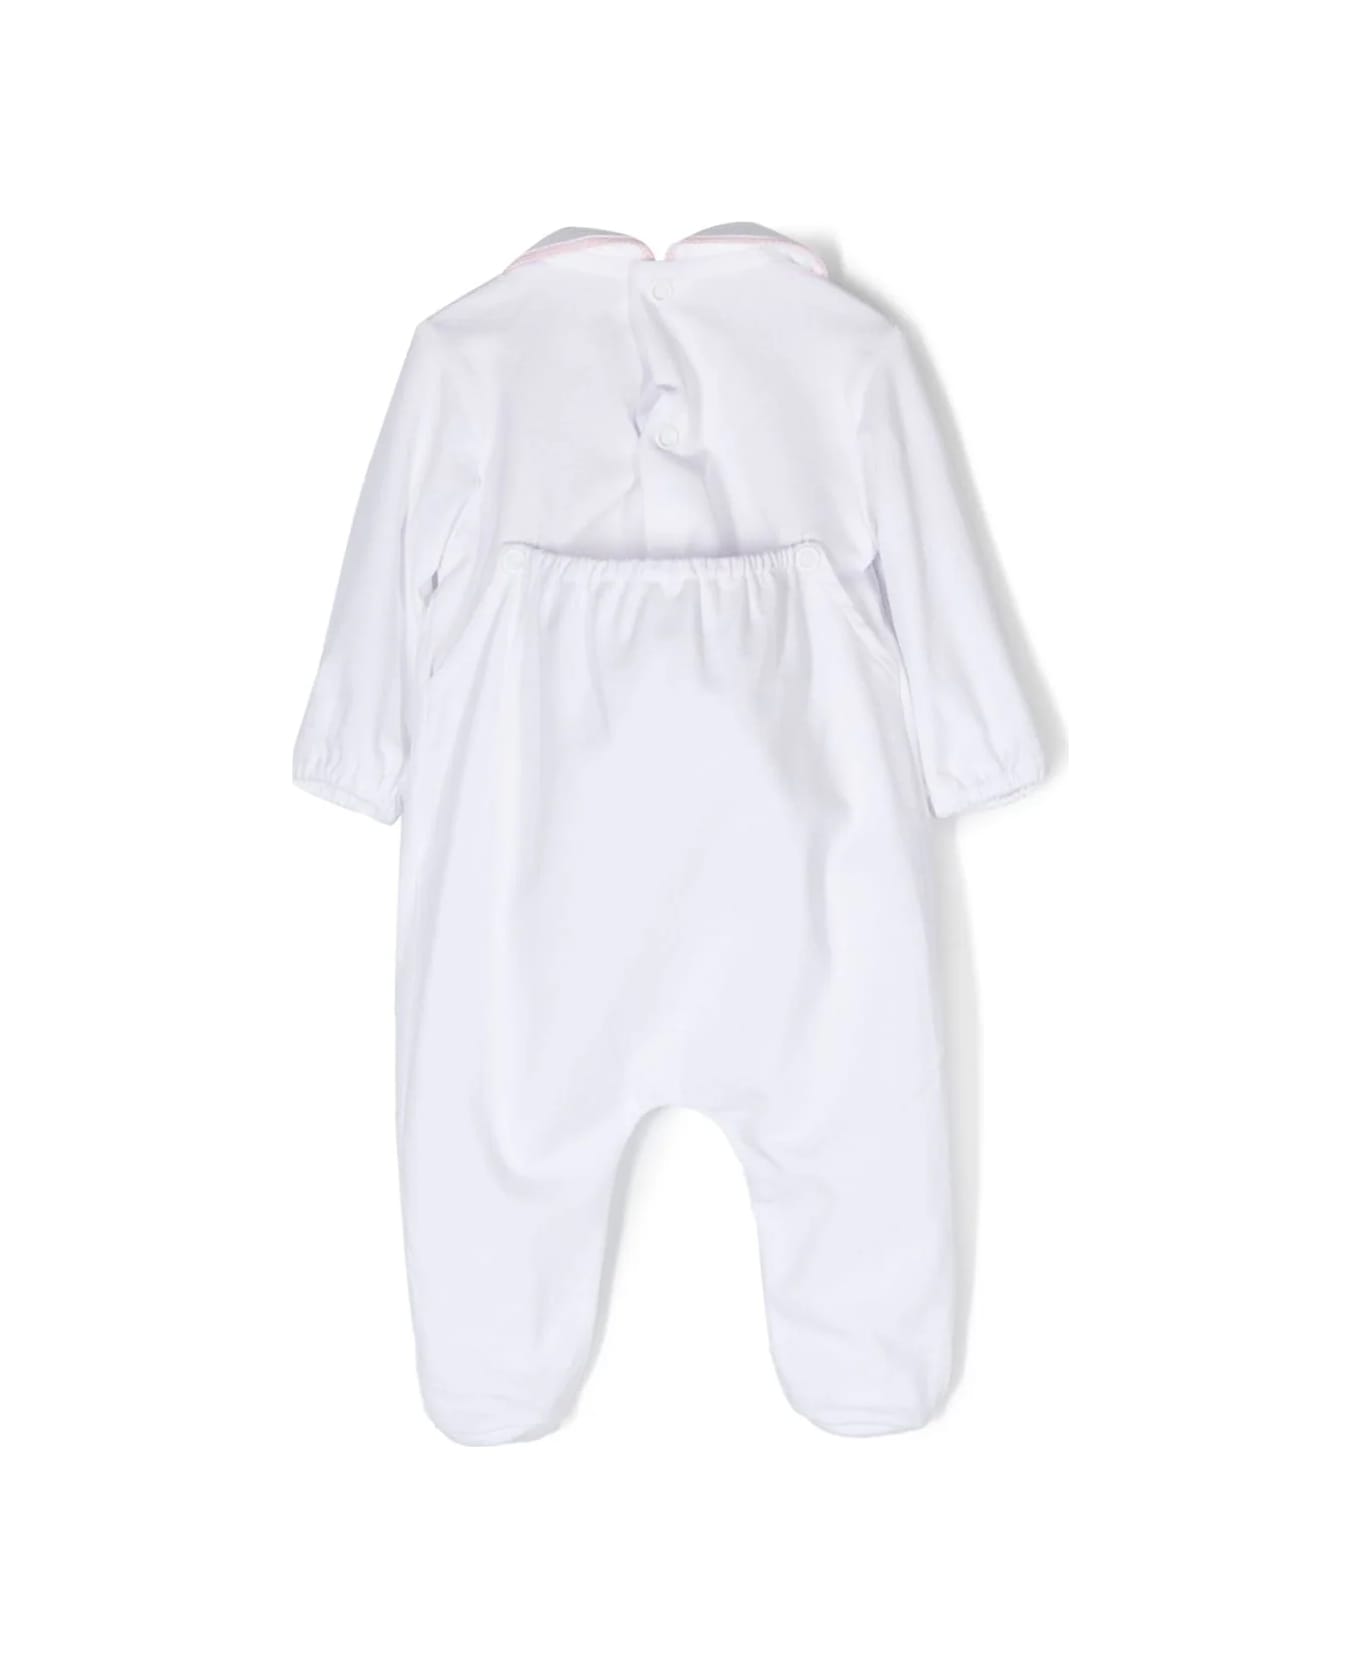 Little Bear Playsuit With Princess Print - White